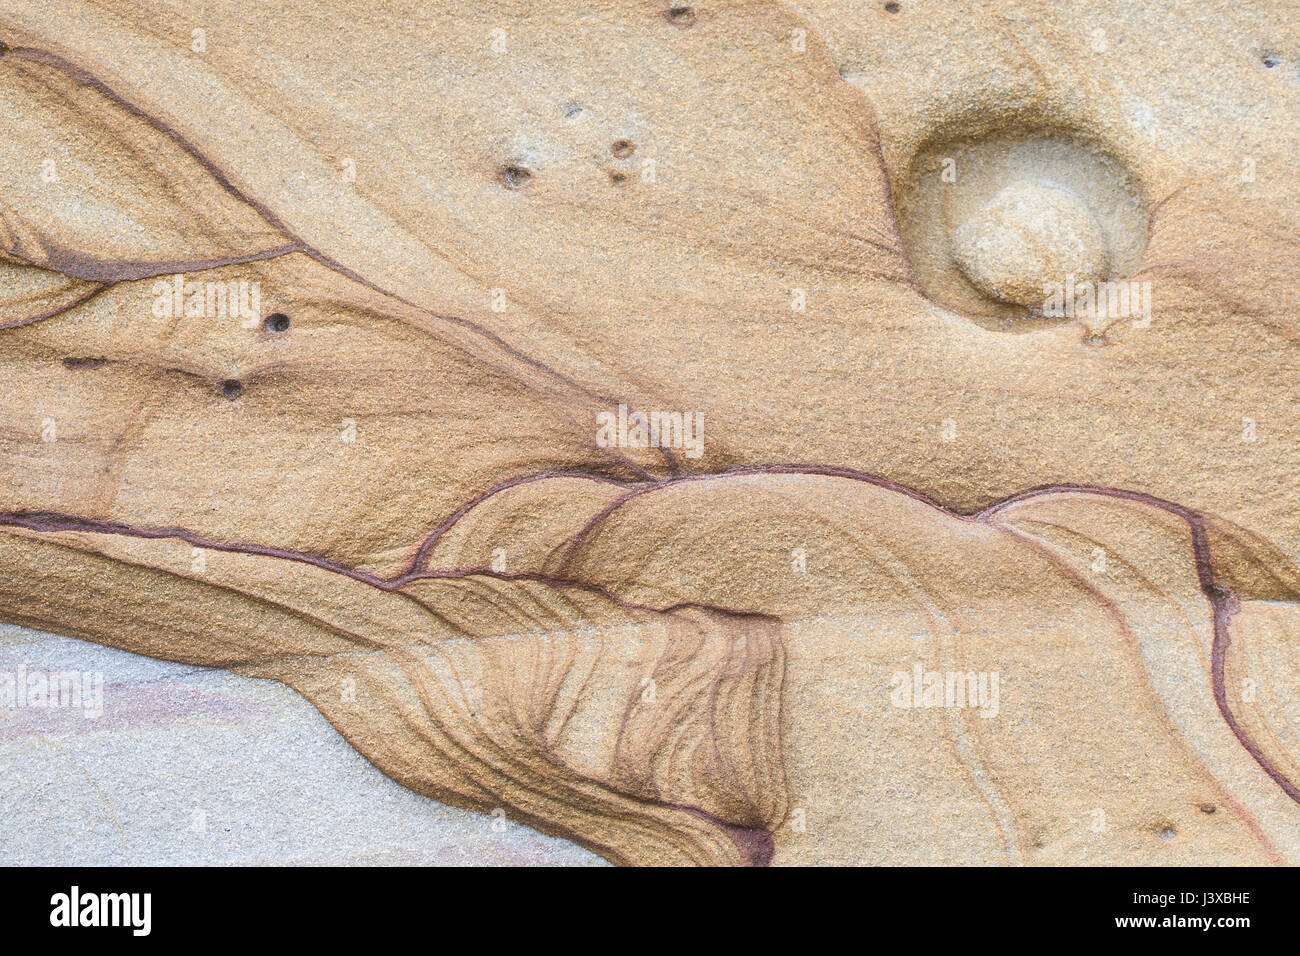 An abstract shape in a sandstone cliff that resembles a landscape. Stock Photo